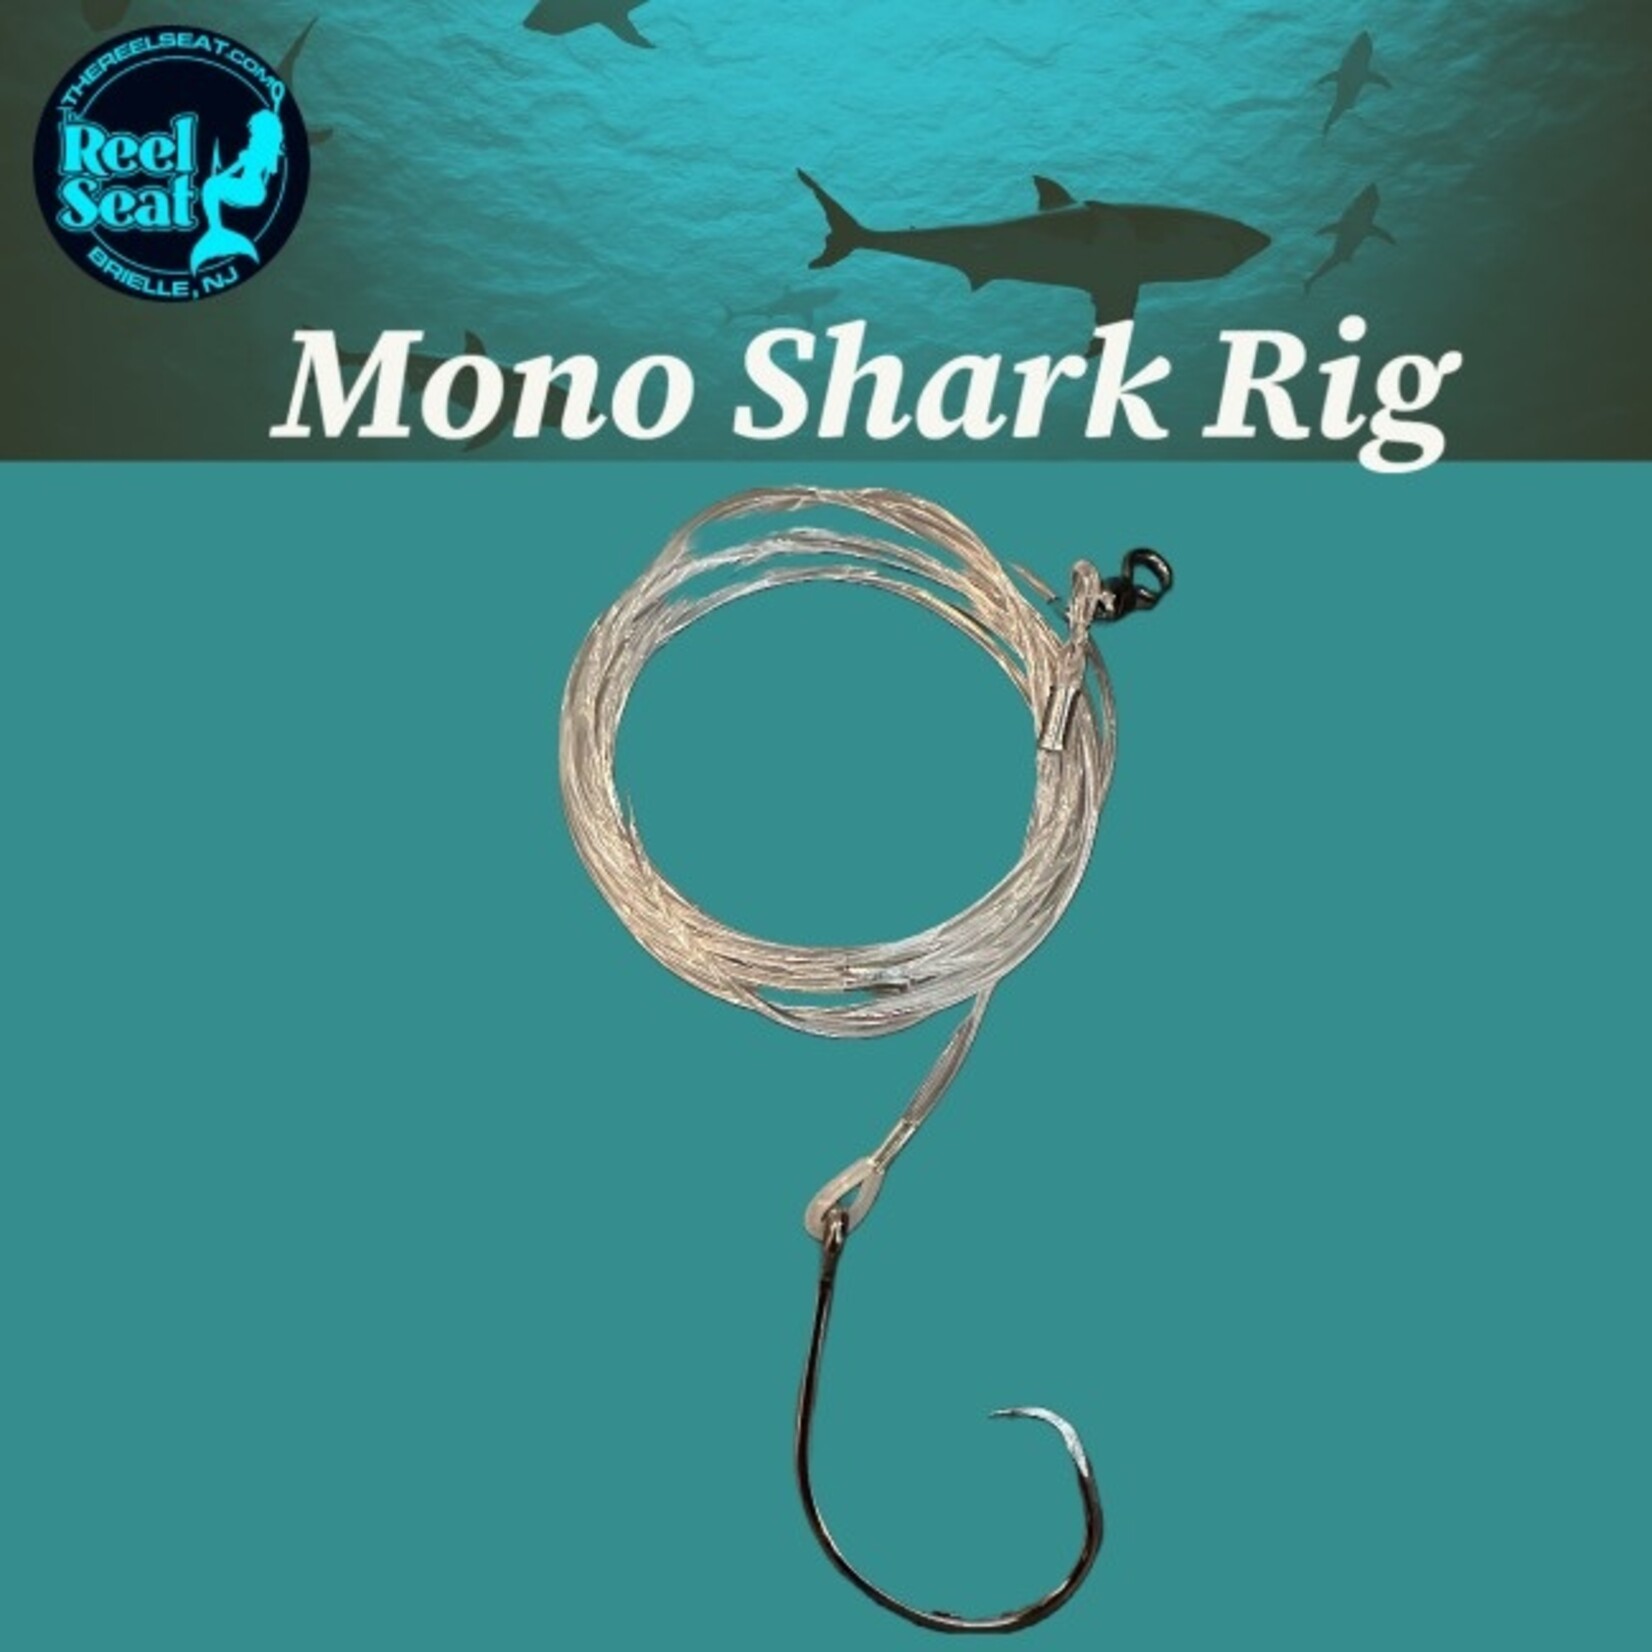 The Reel Seat RS Mono Shark Rig